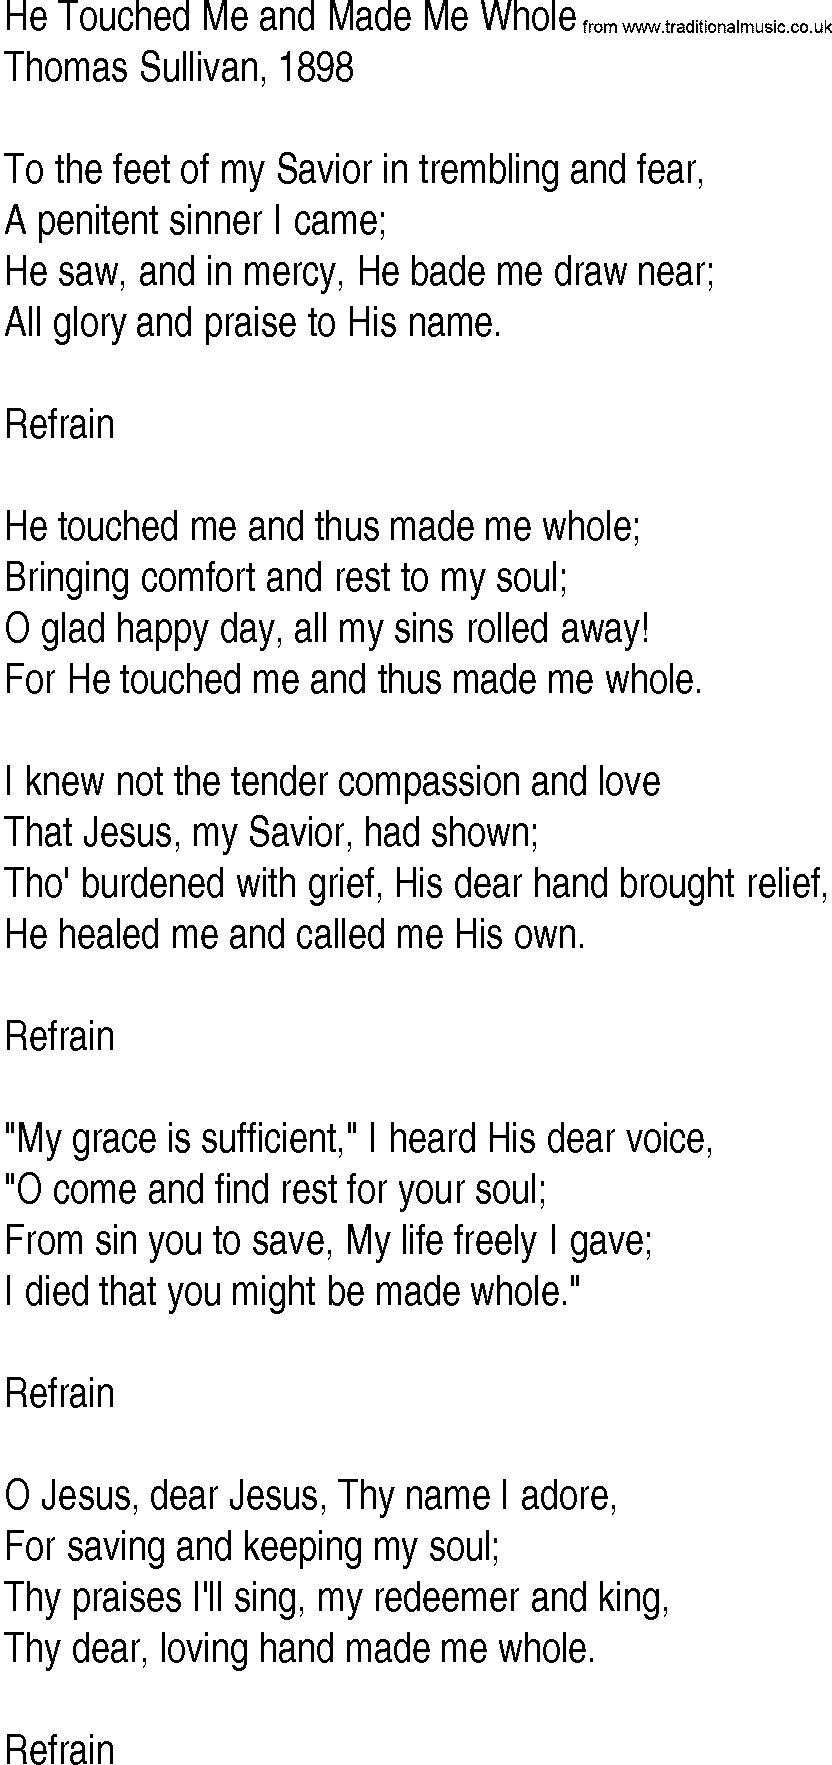 Hymn and Gospel Song: He Touched Me and Made Me Whole by Thomas Sullivan lyrics